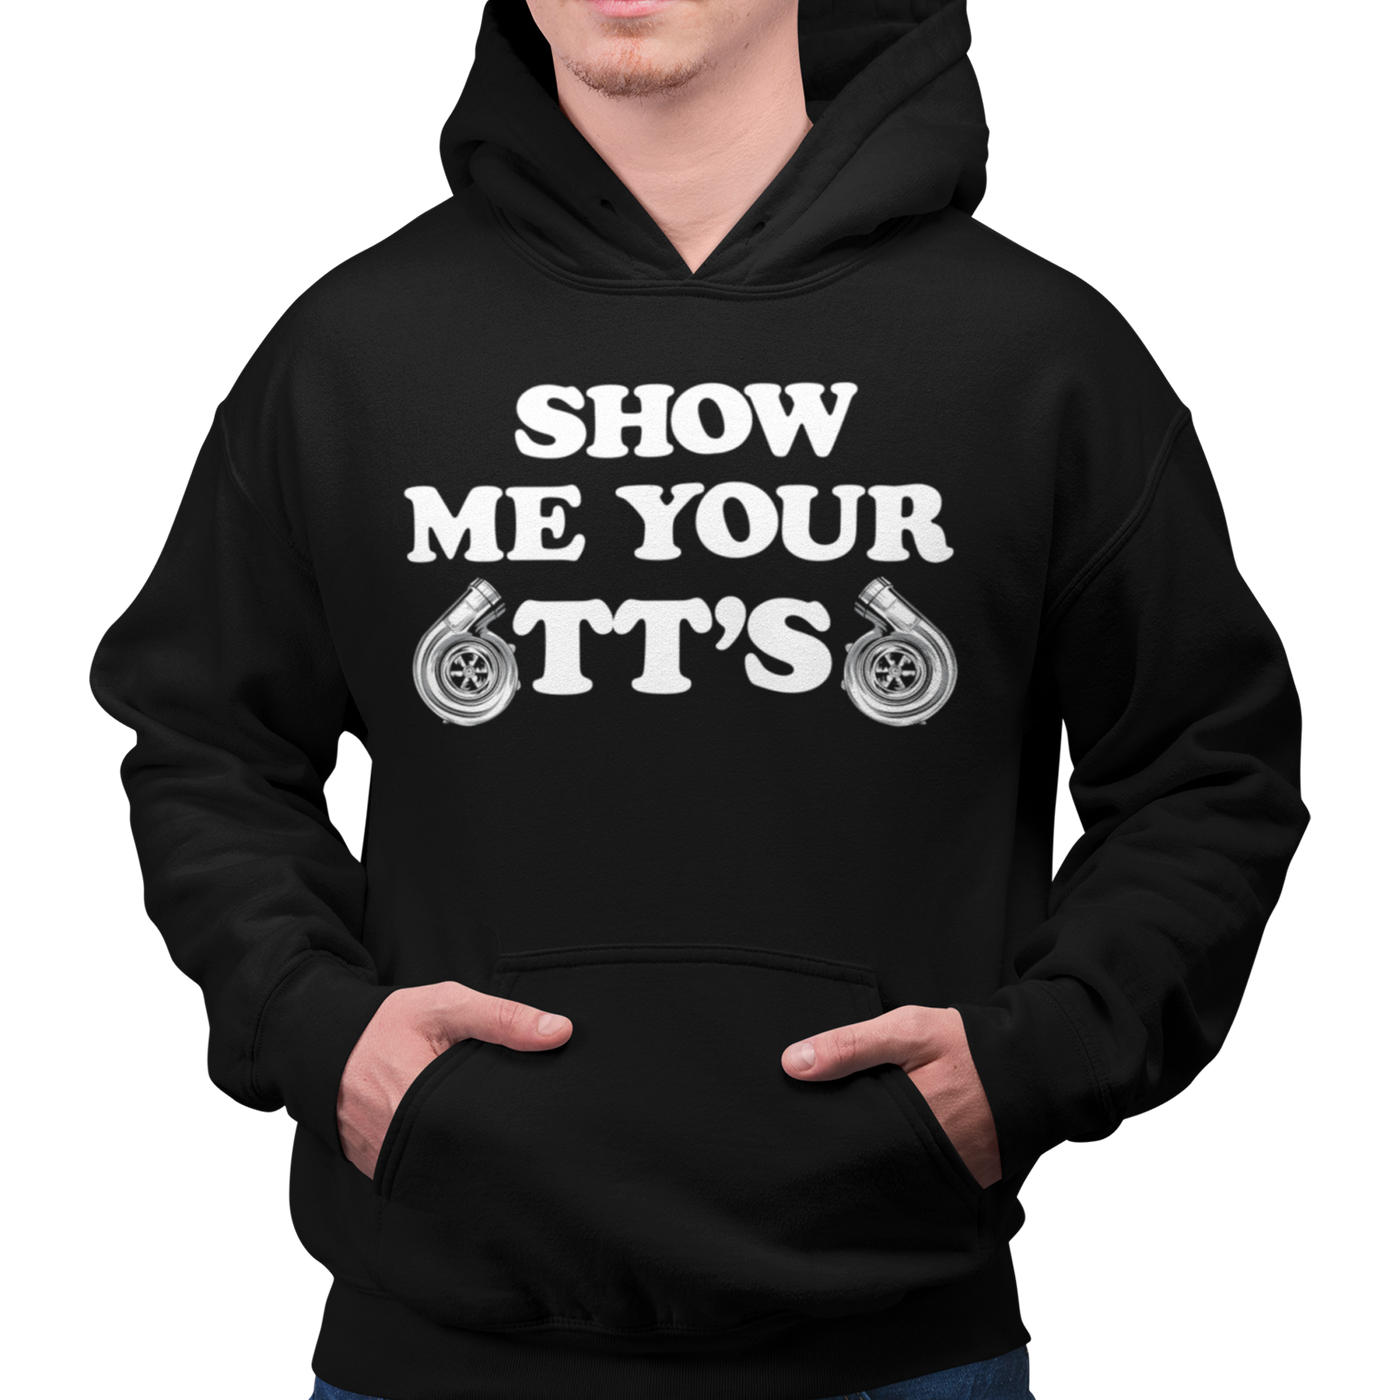 SHOW ME YOUR TTS TURBO Hoodie